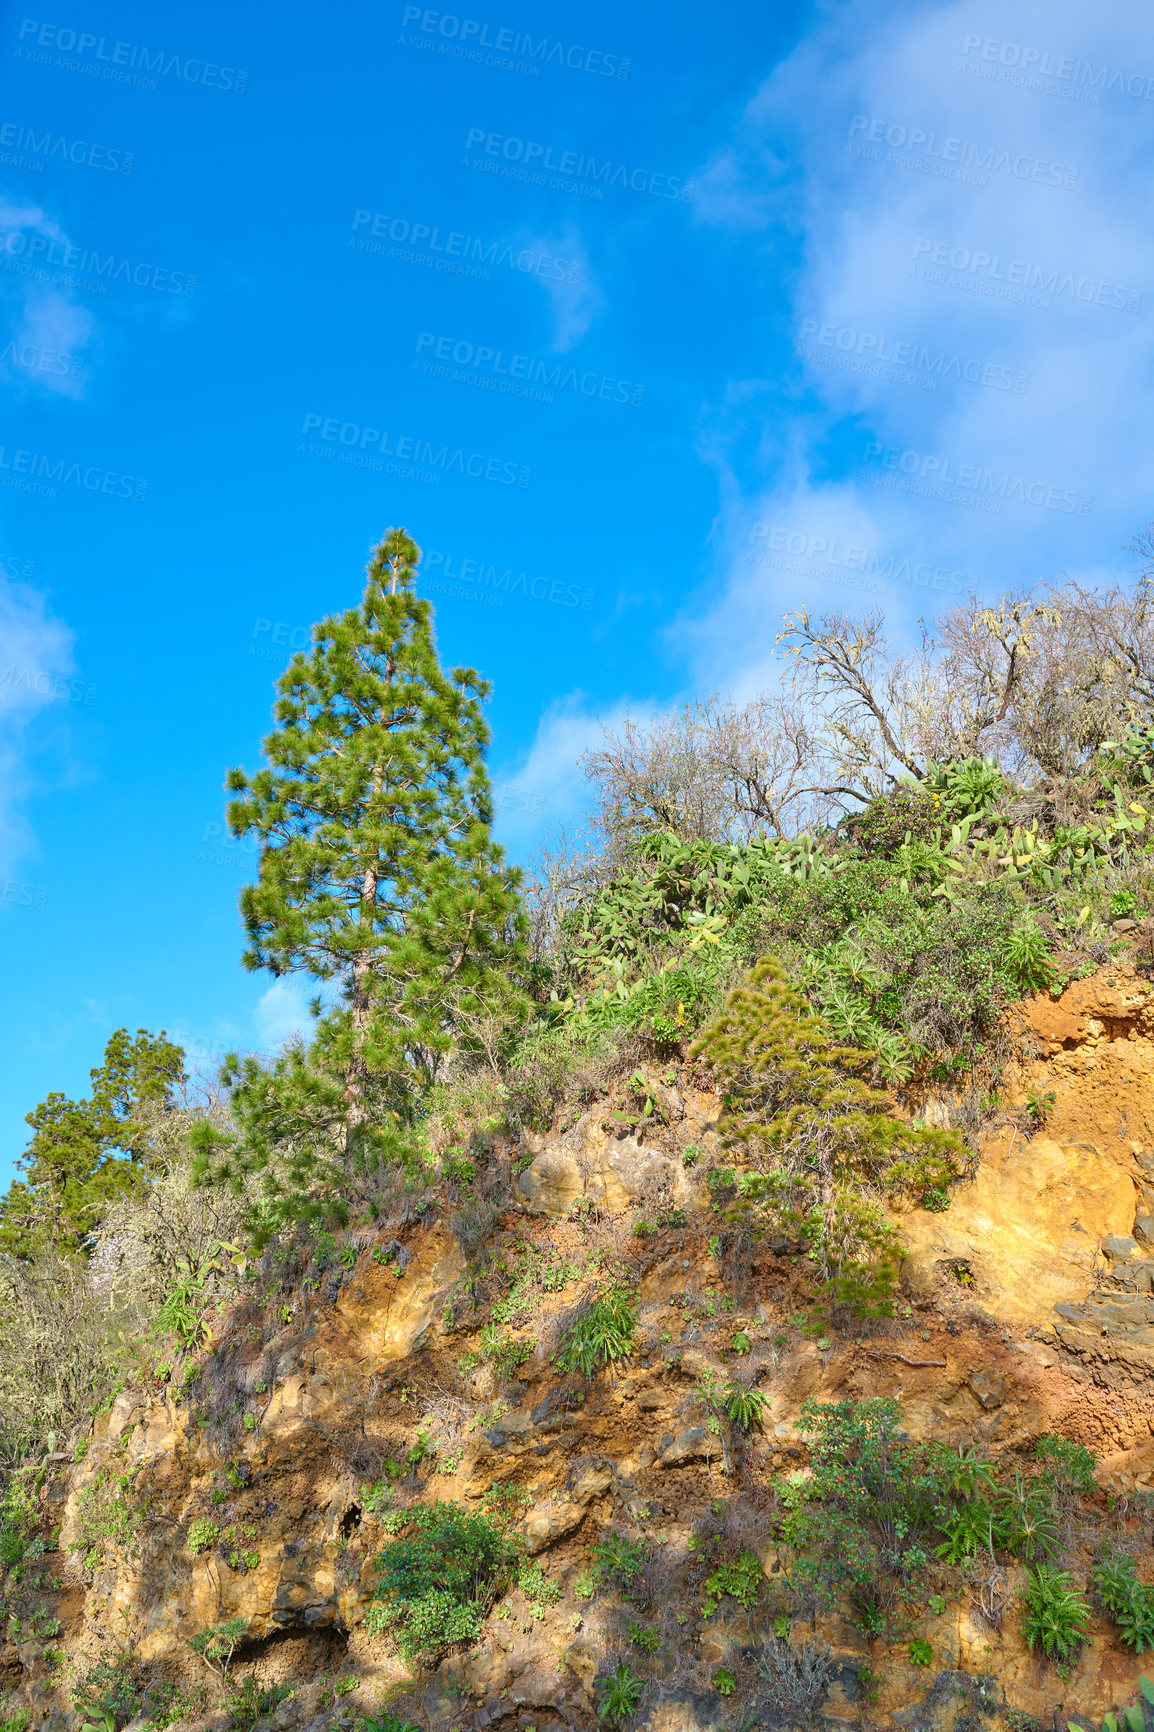 Buy stock photo Trees growing on an uphill mountain. Pine forests in the mountains of La Palma, Canary Islands, Spain, are covered by lush green vegetation growing on a rough and rocky terrain along a mountainside